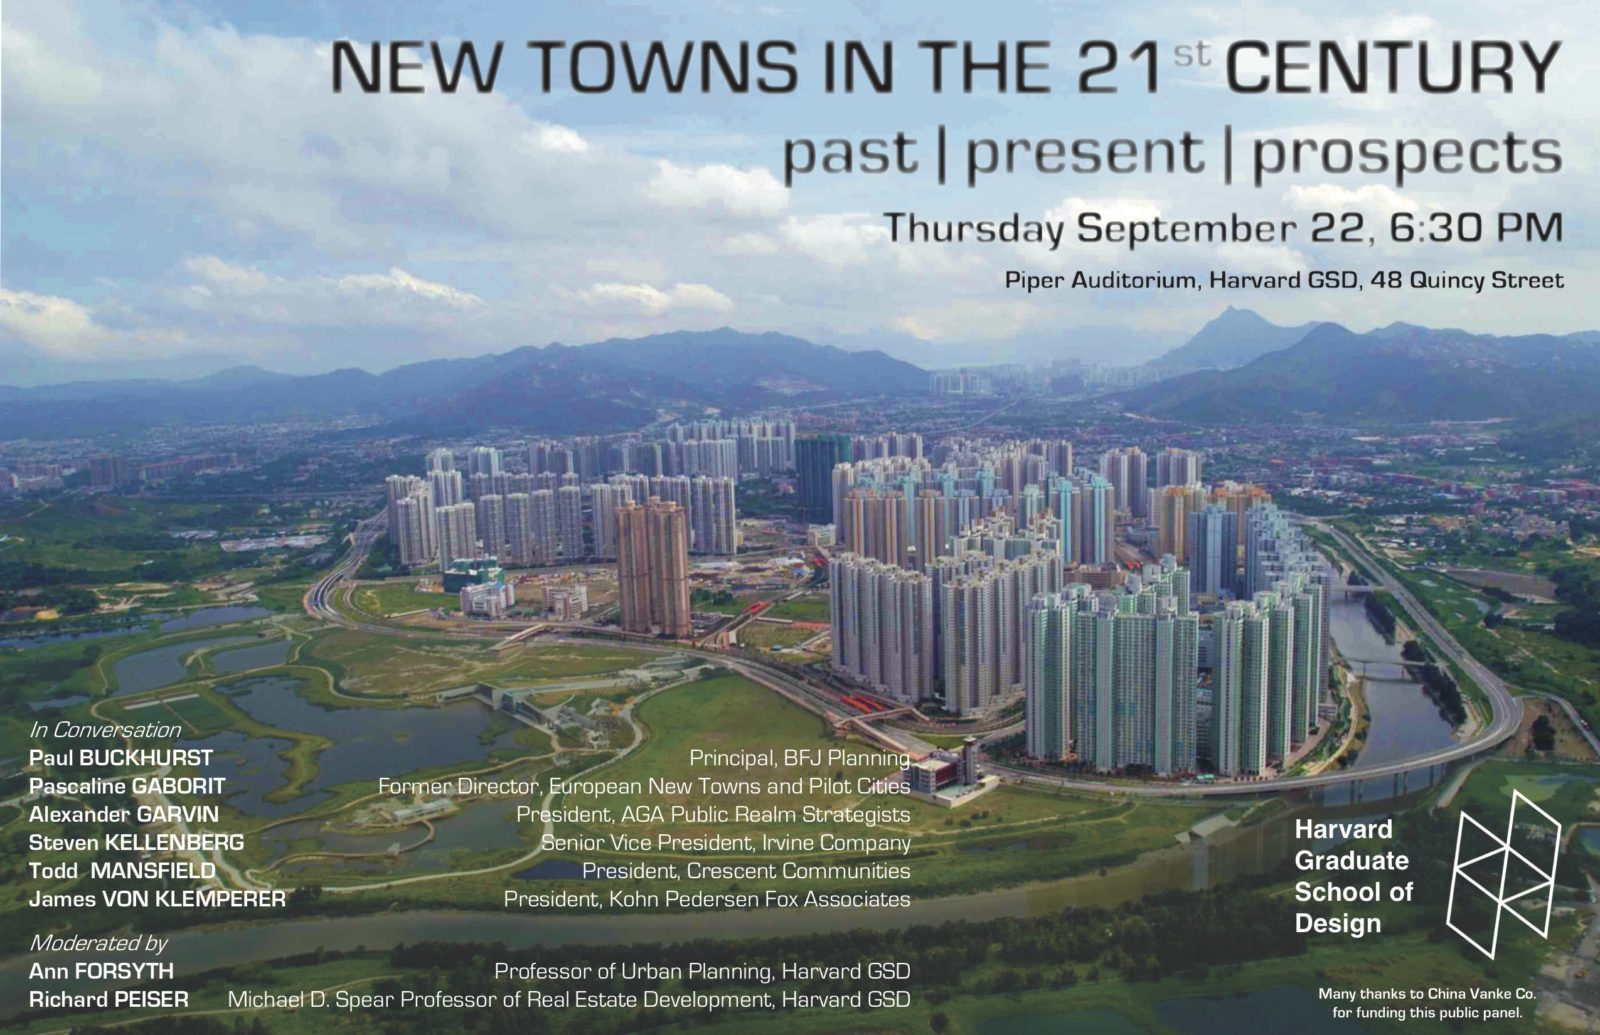 New Towns in the 21st Century Poster